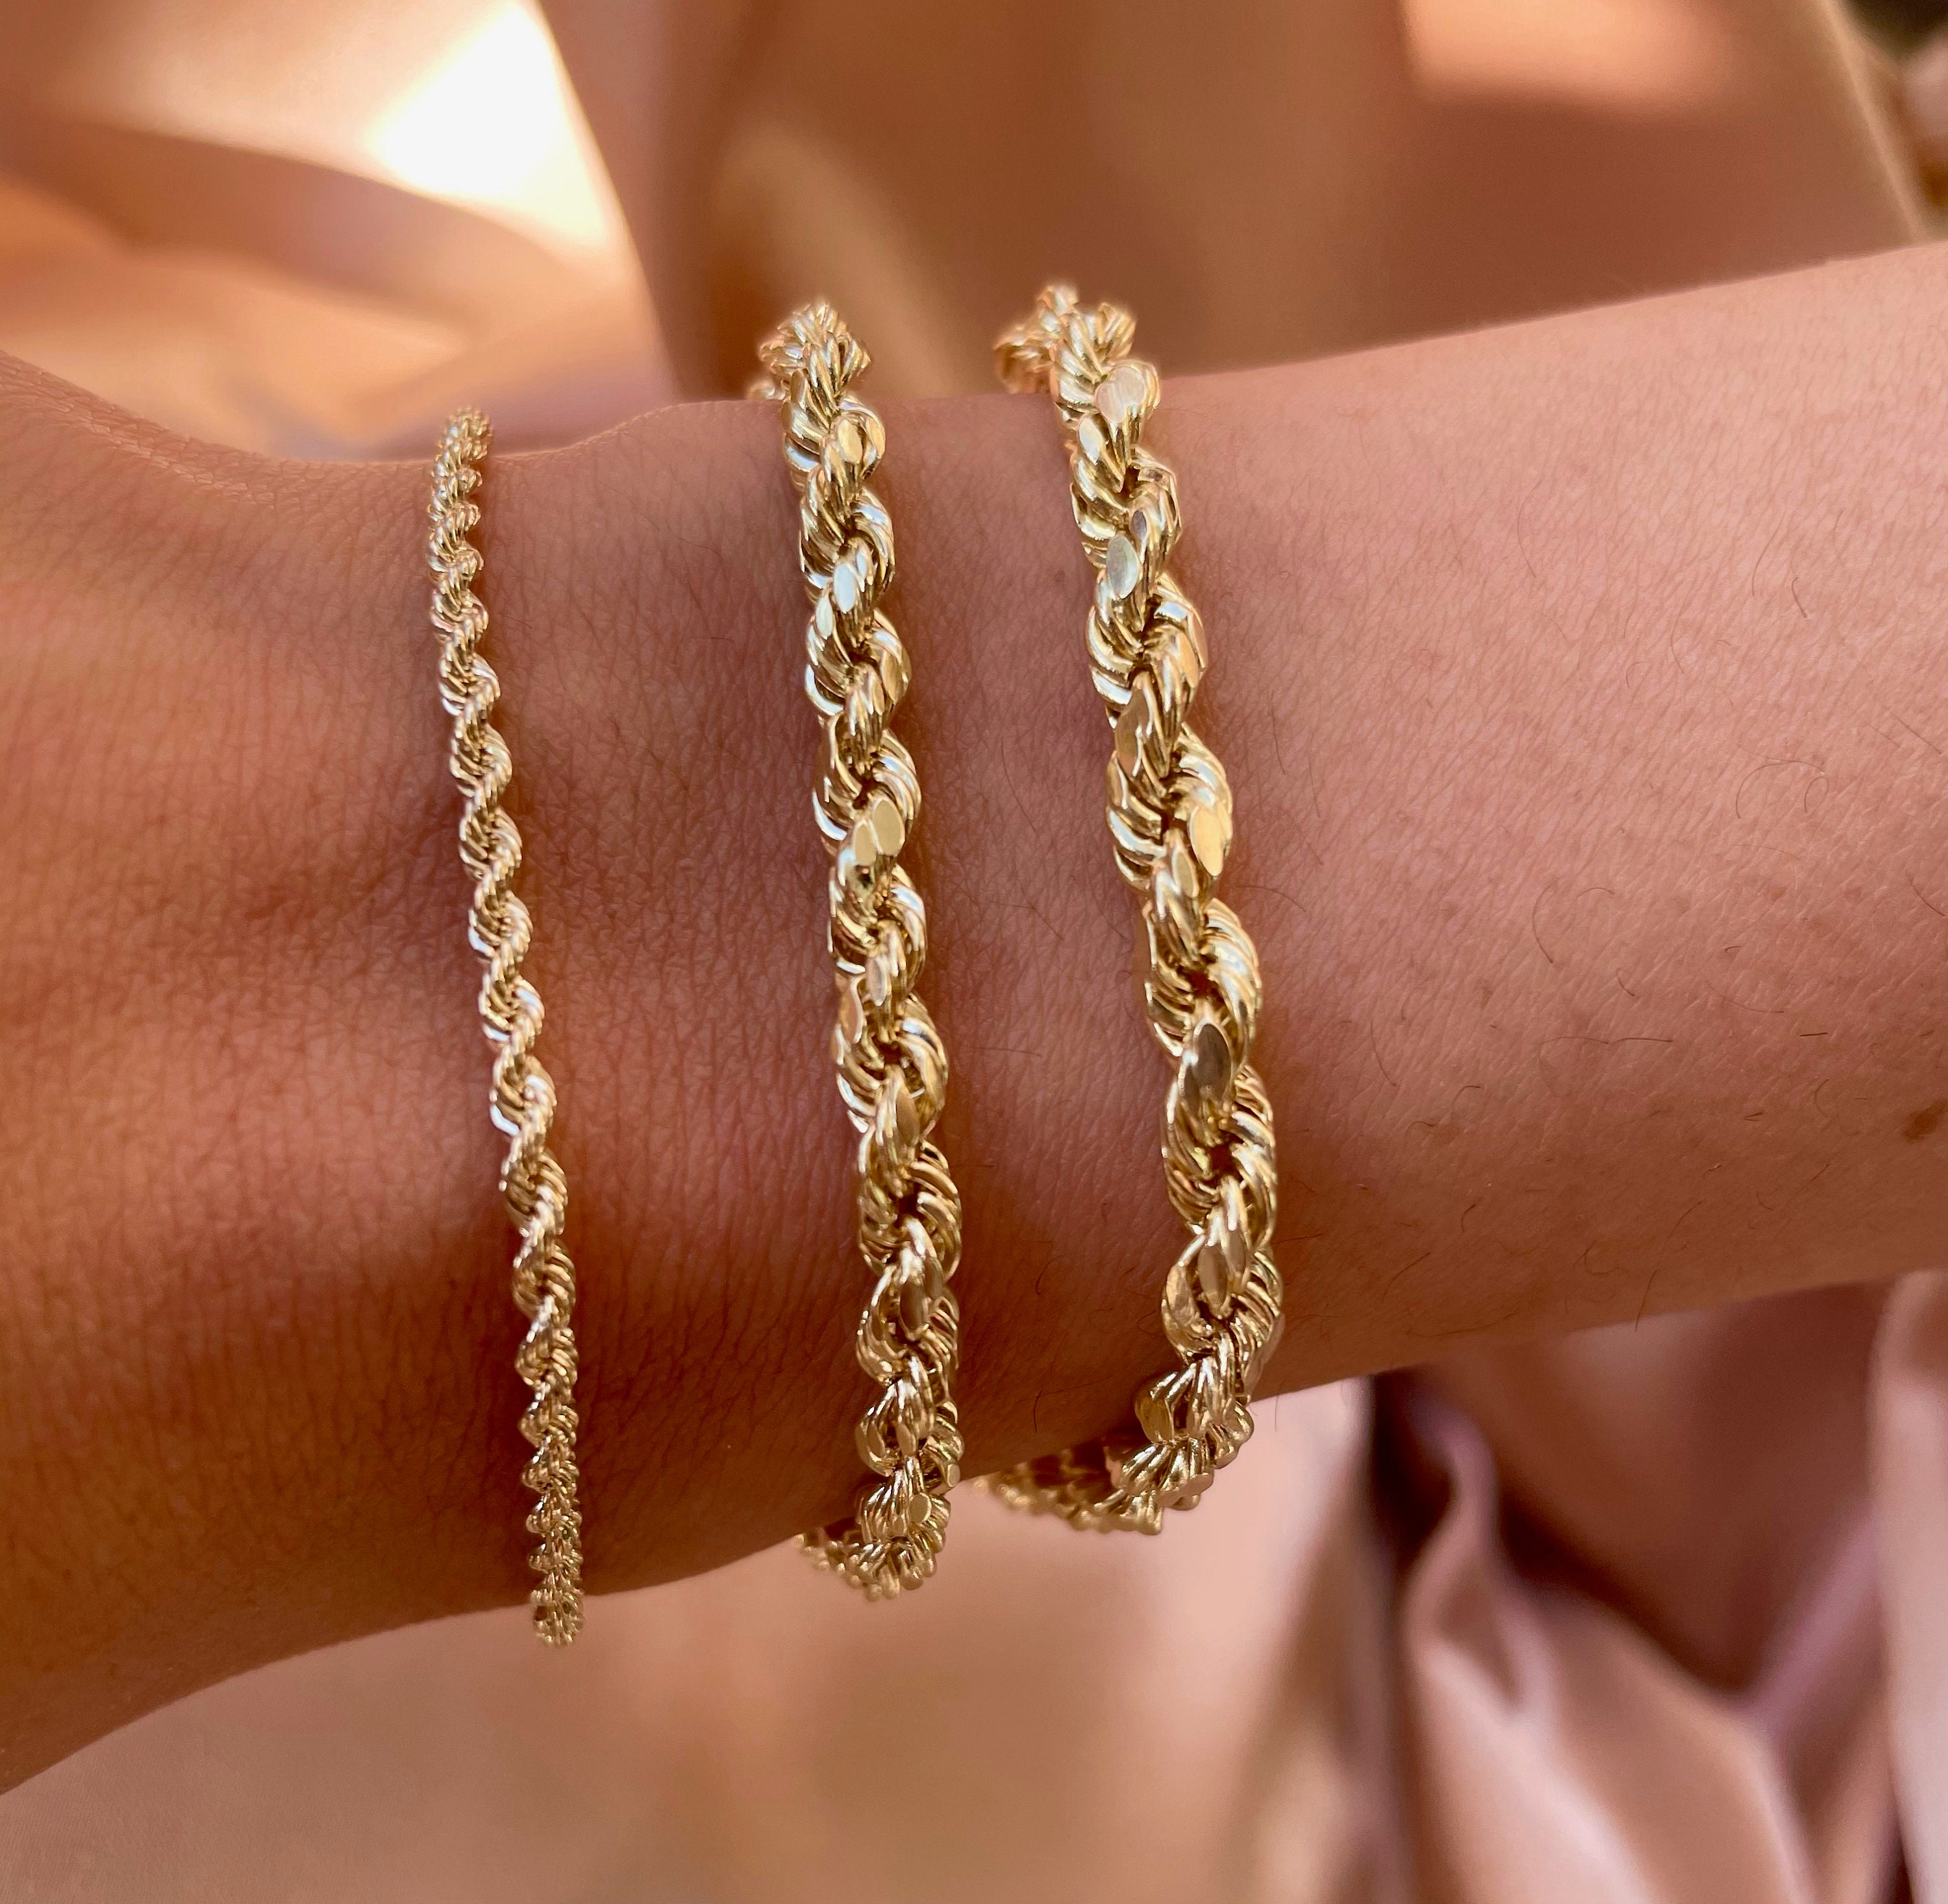 Yellow Gold Rope Chain Bracelet 7 3/4